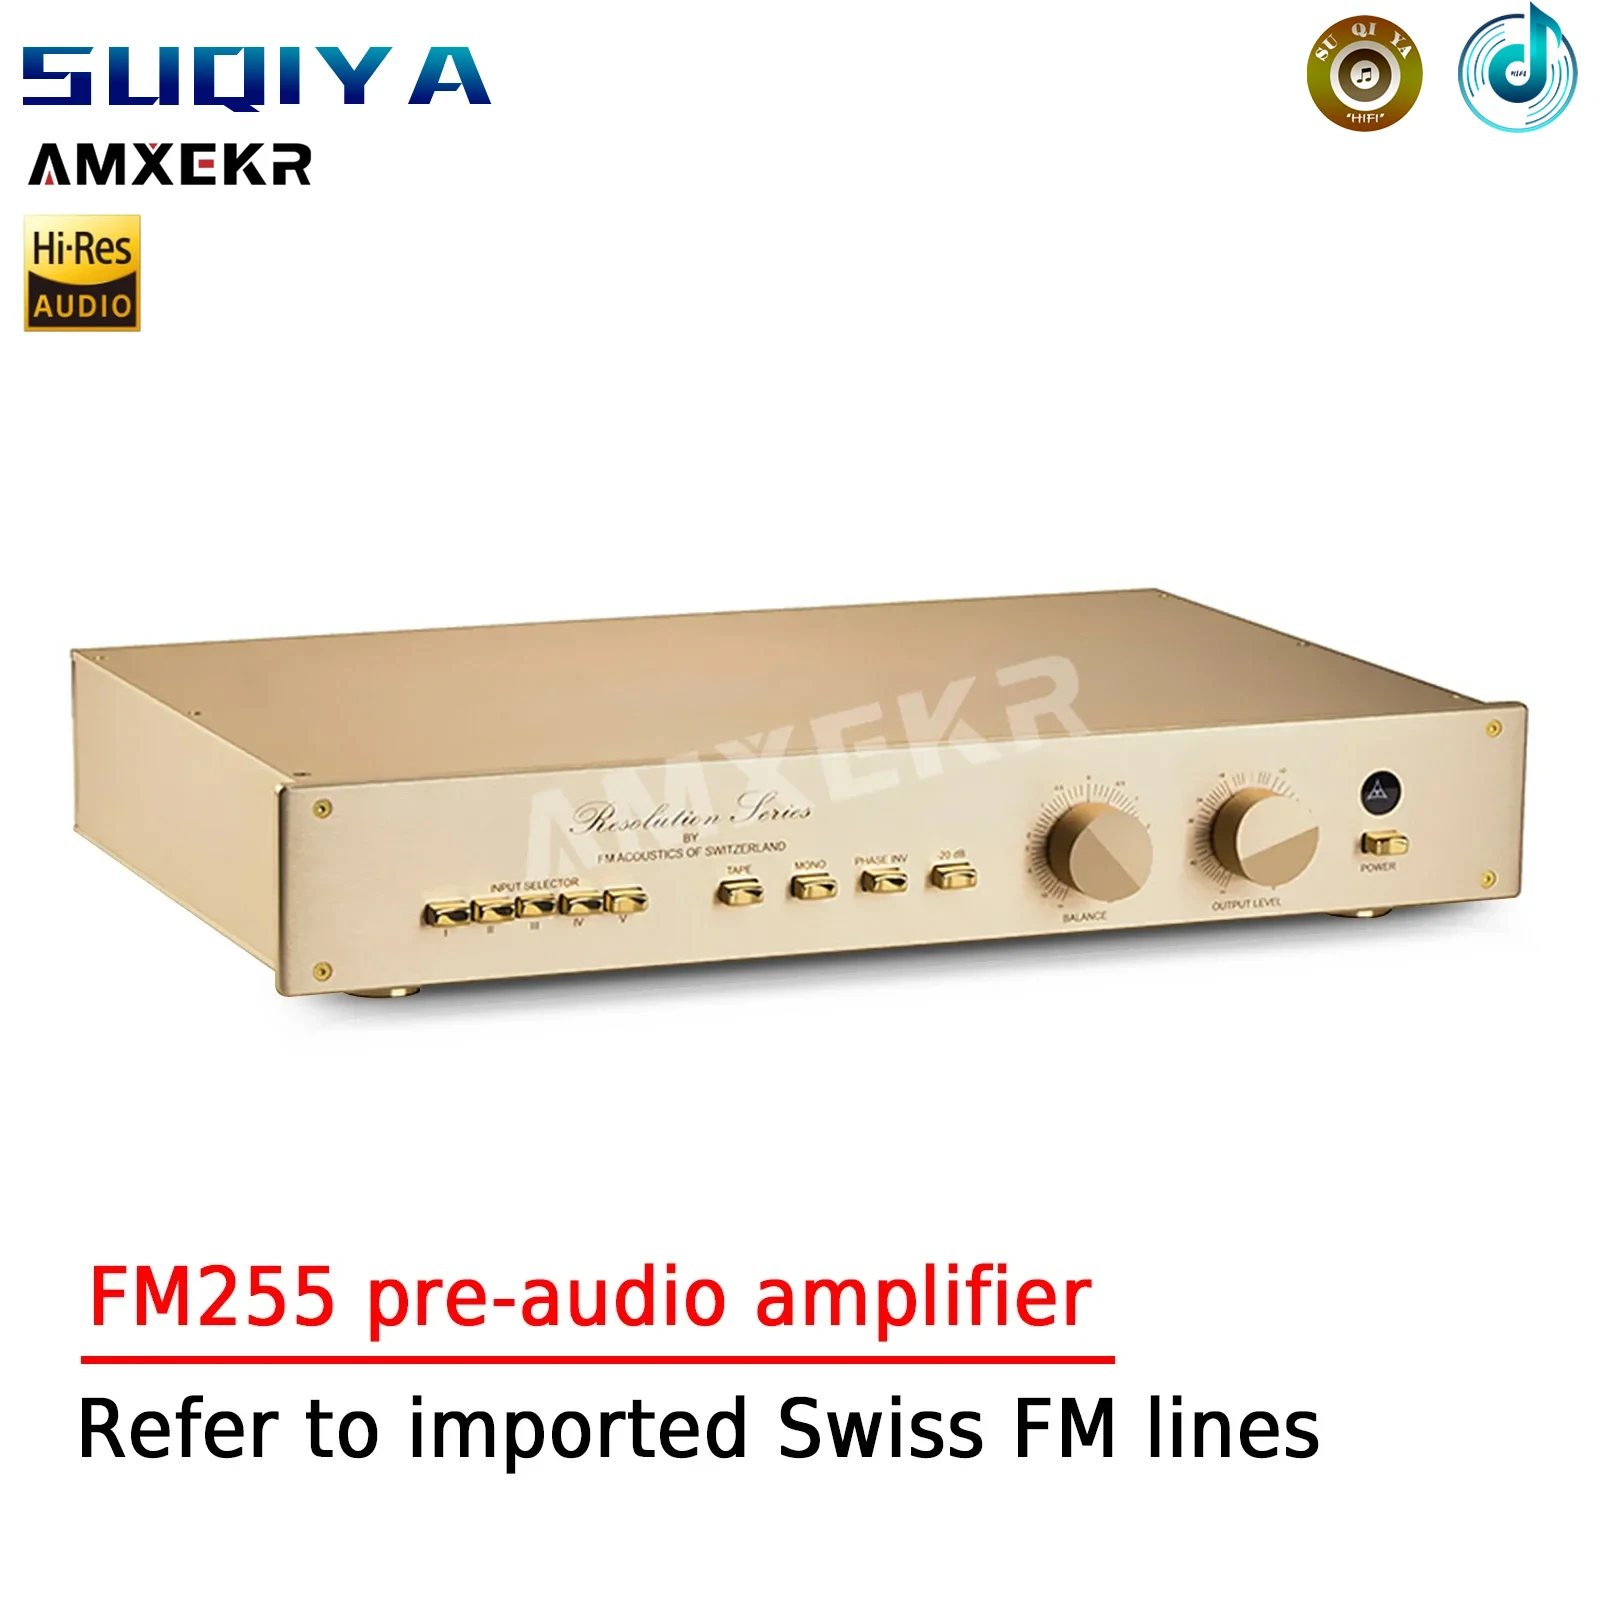 

AMXEKR FM255 Reference Imported Swiss FM Line Classic Fever Pre-stage Home Preaudio Amplifier